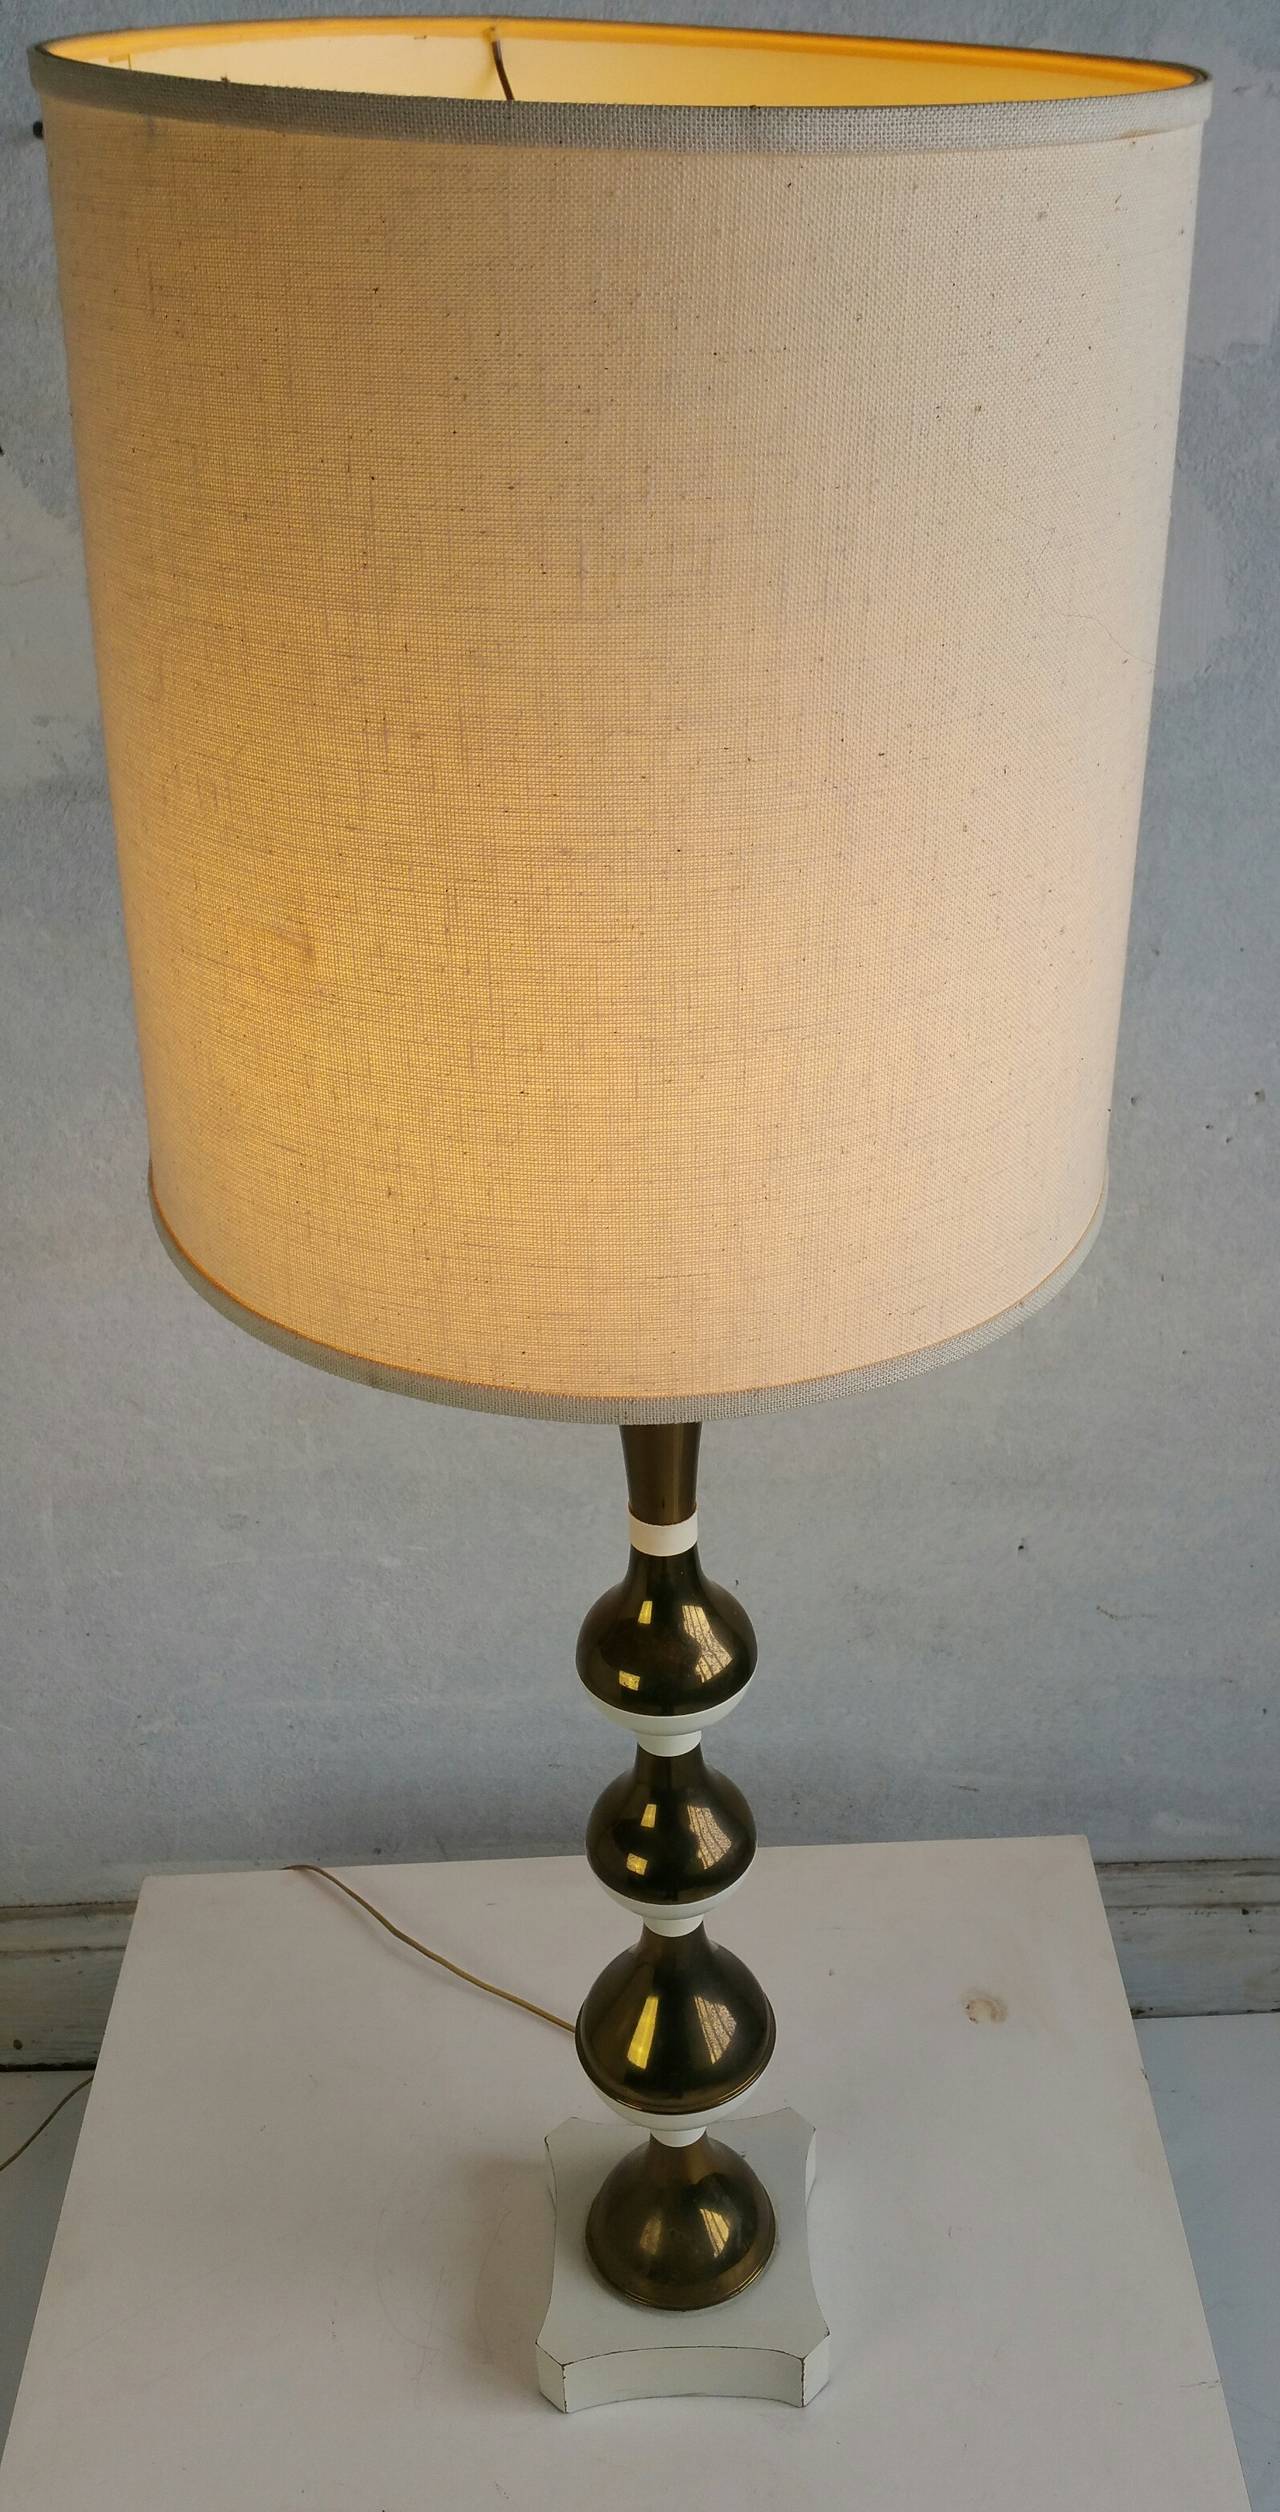 American Dramatic Brass and White Table Lamp in the Modernist, Hollywood Regency Style